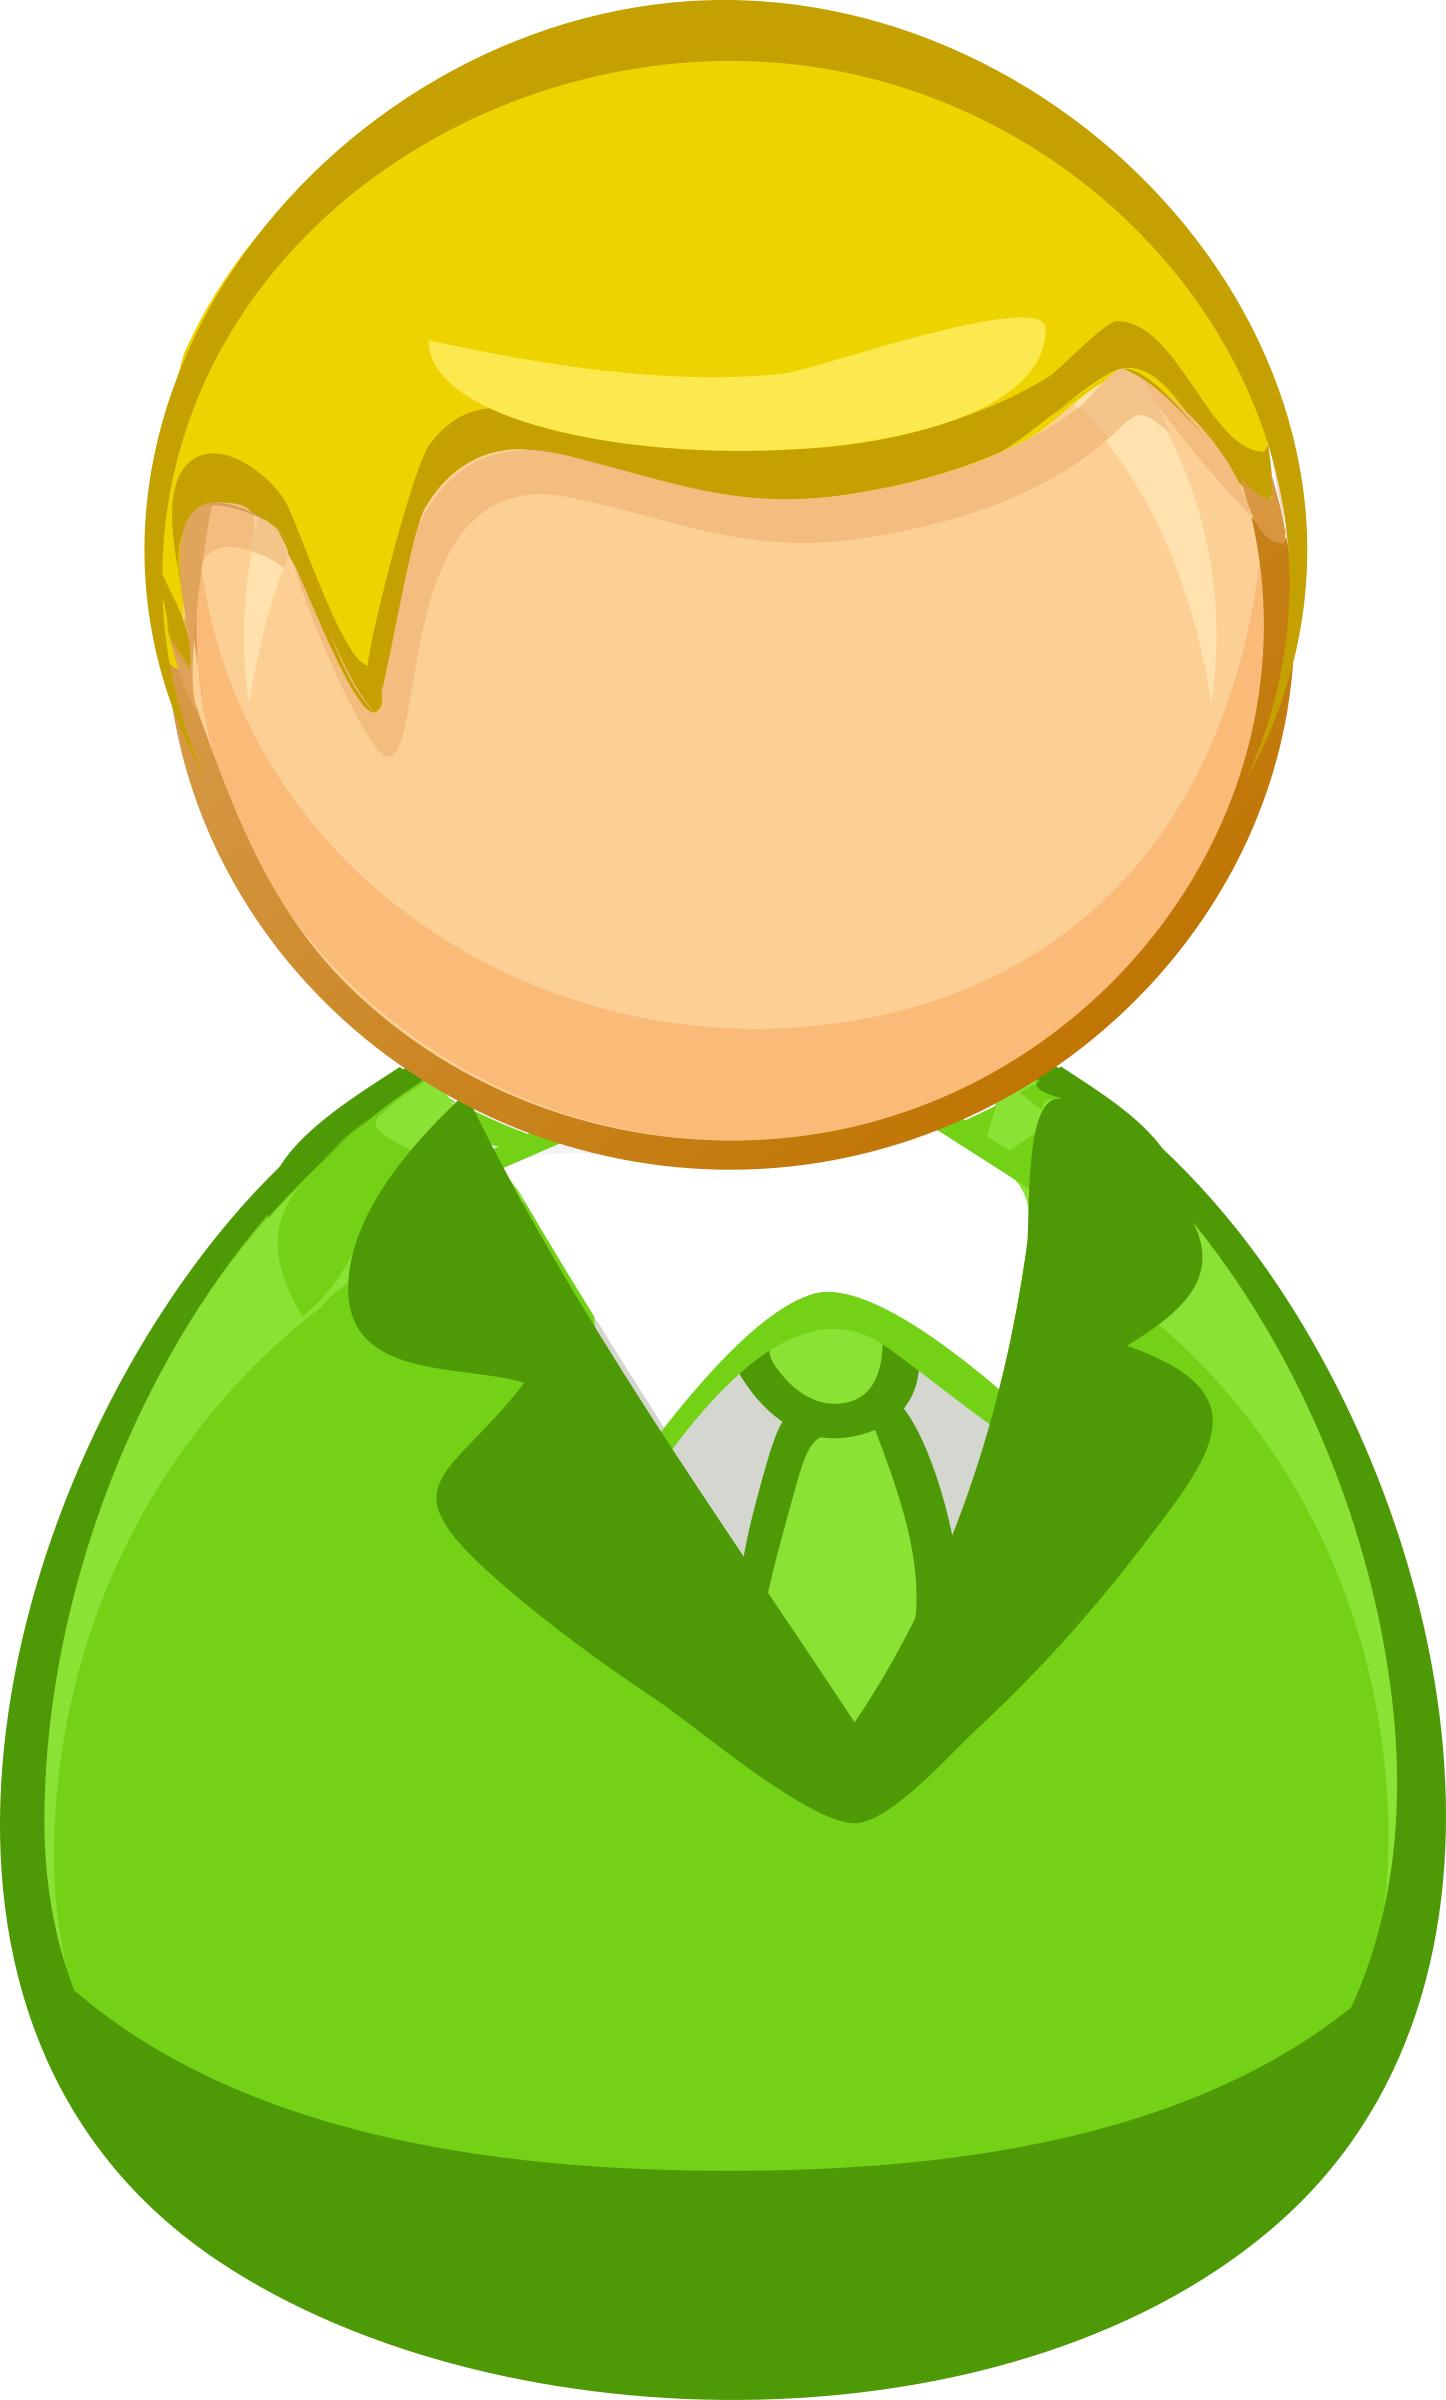 Architetto remix - Green blond man icon png